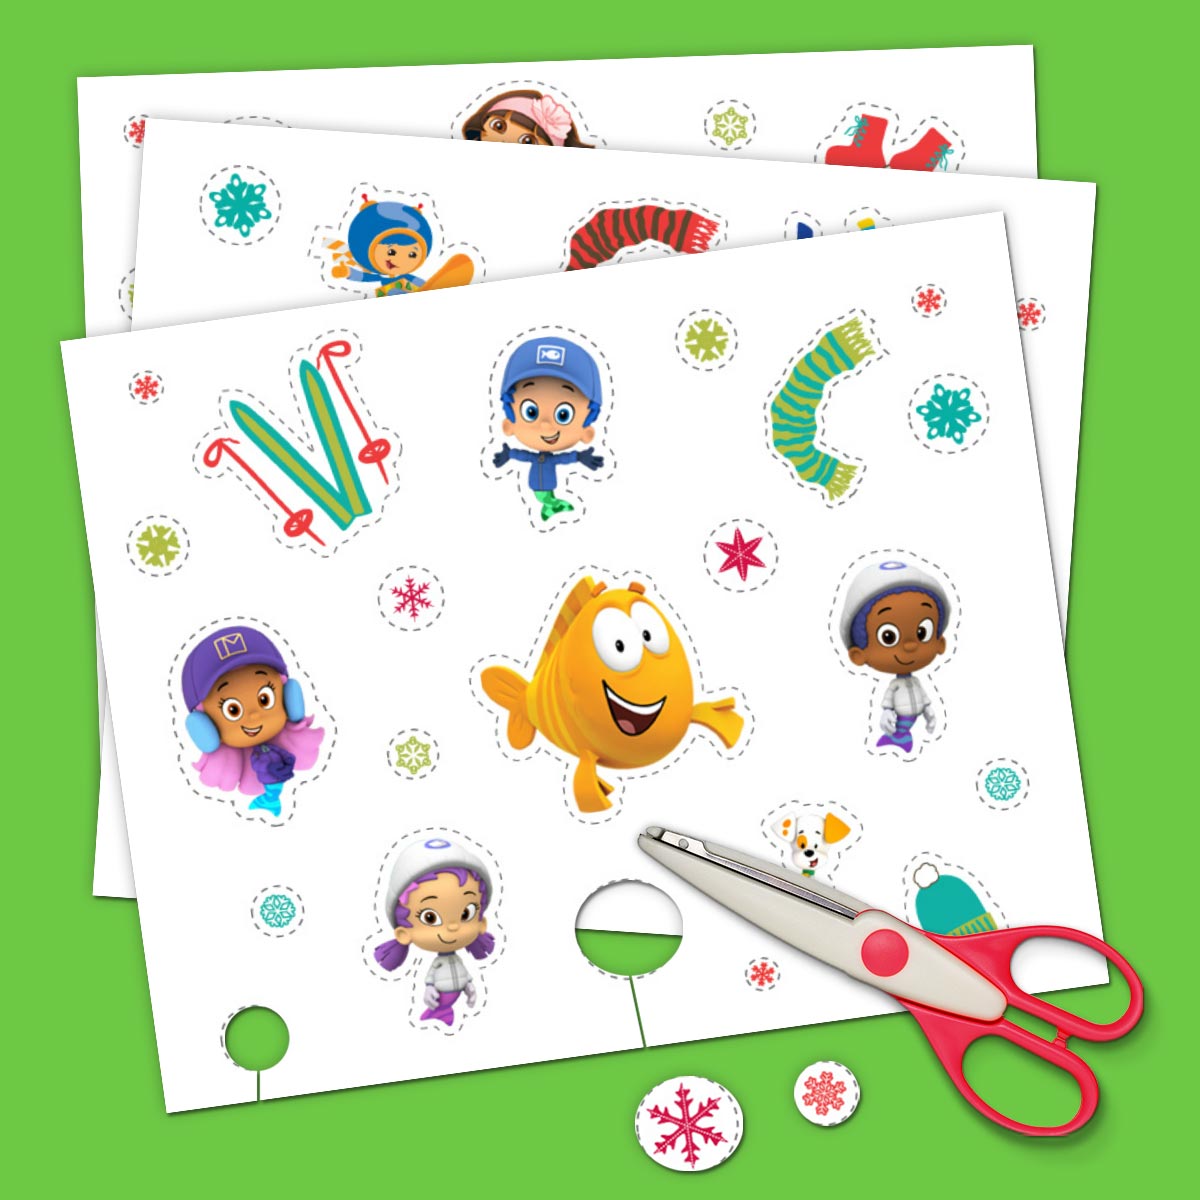 Nick Jr. holiday stickers